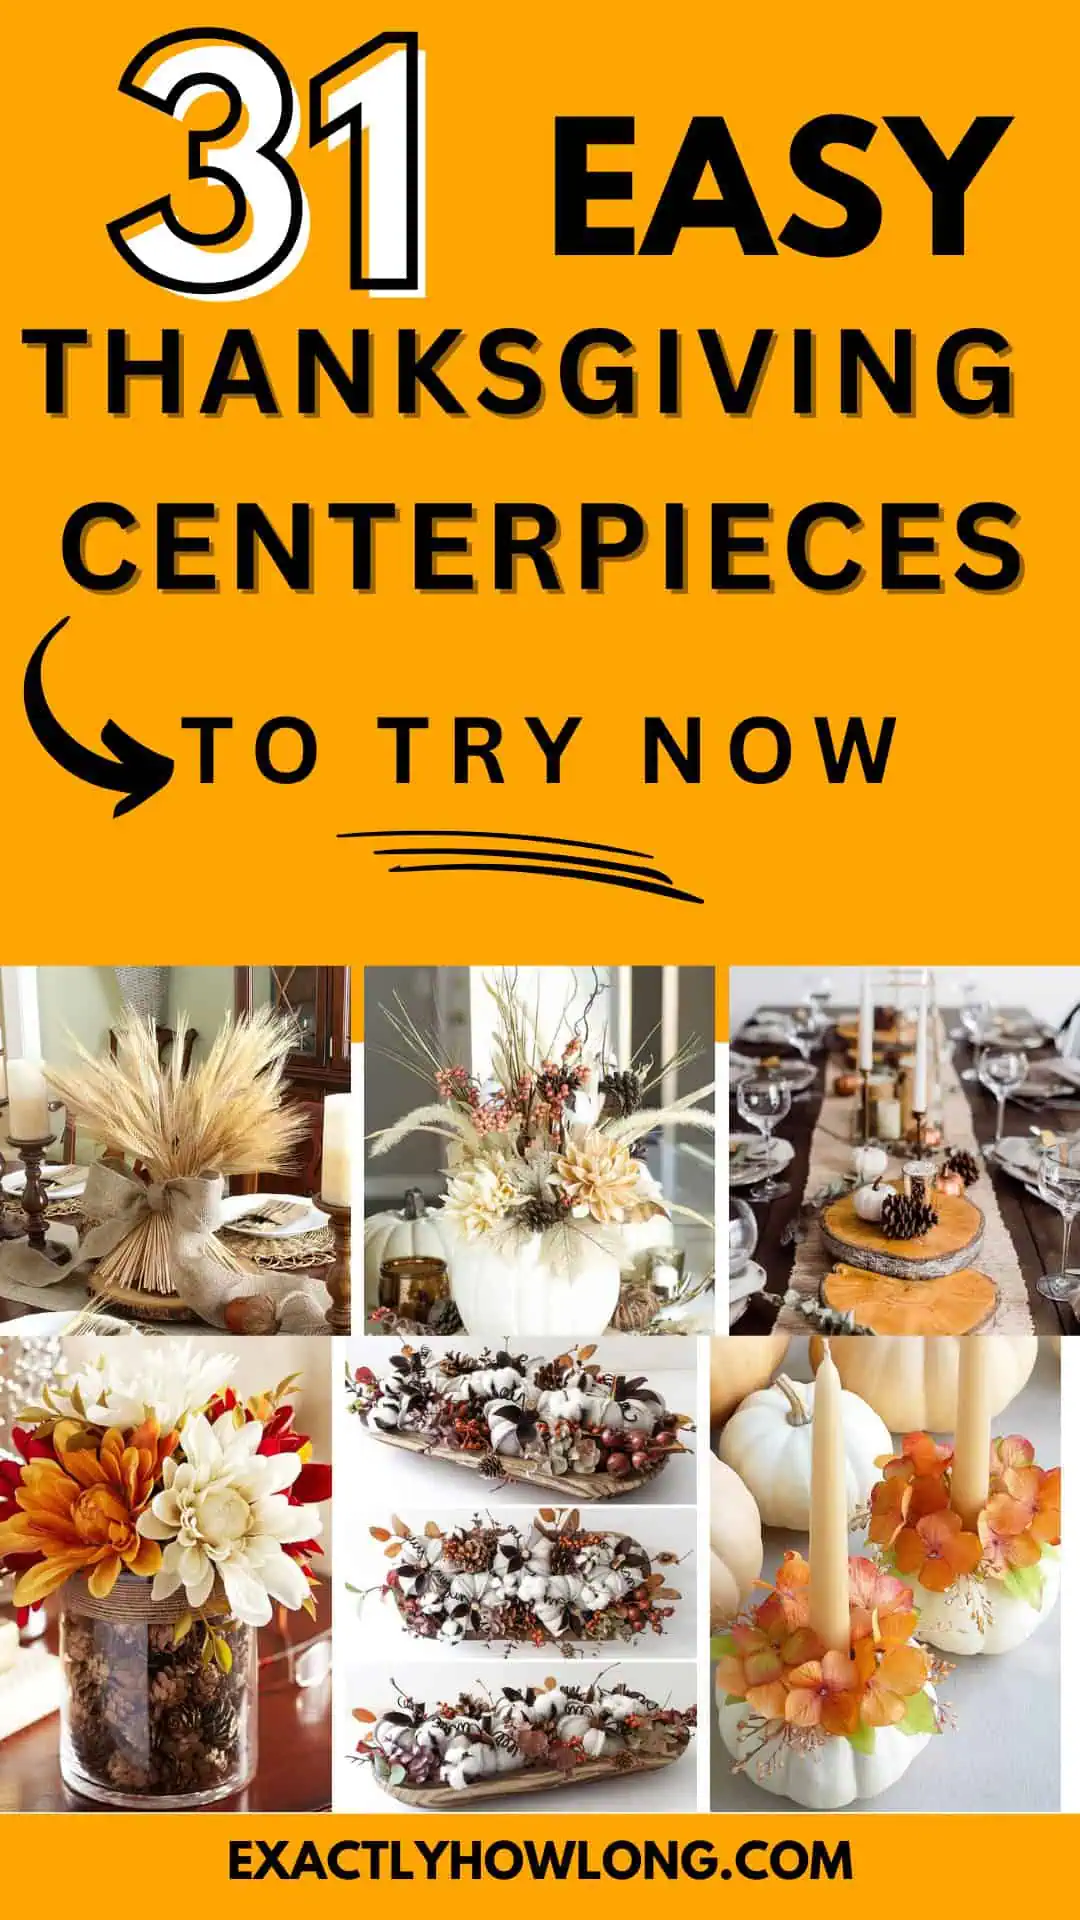 Quick and straightforward DIY Thanksgiving centerpieces for table adornments.